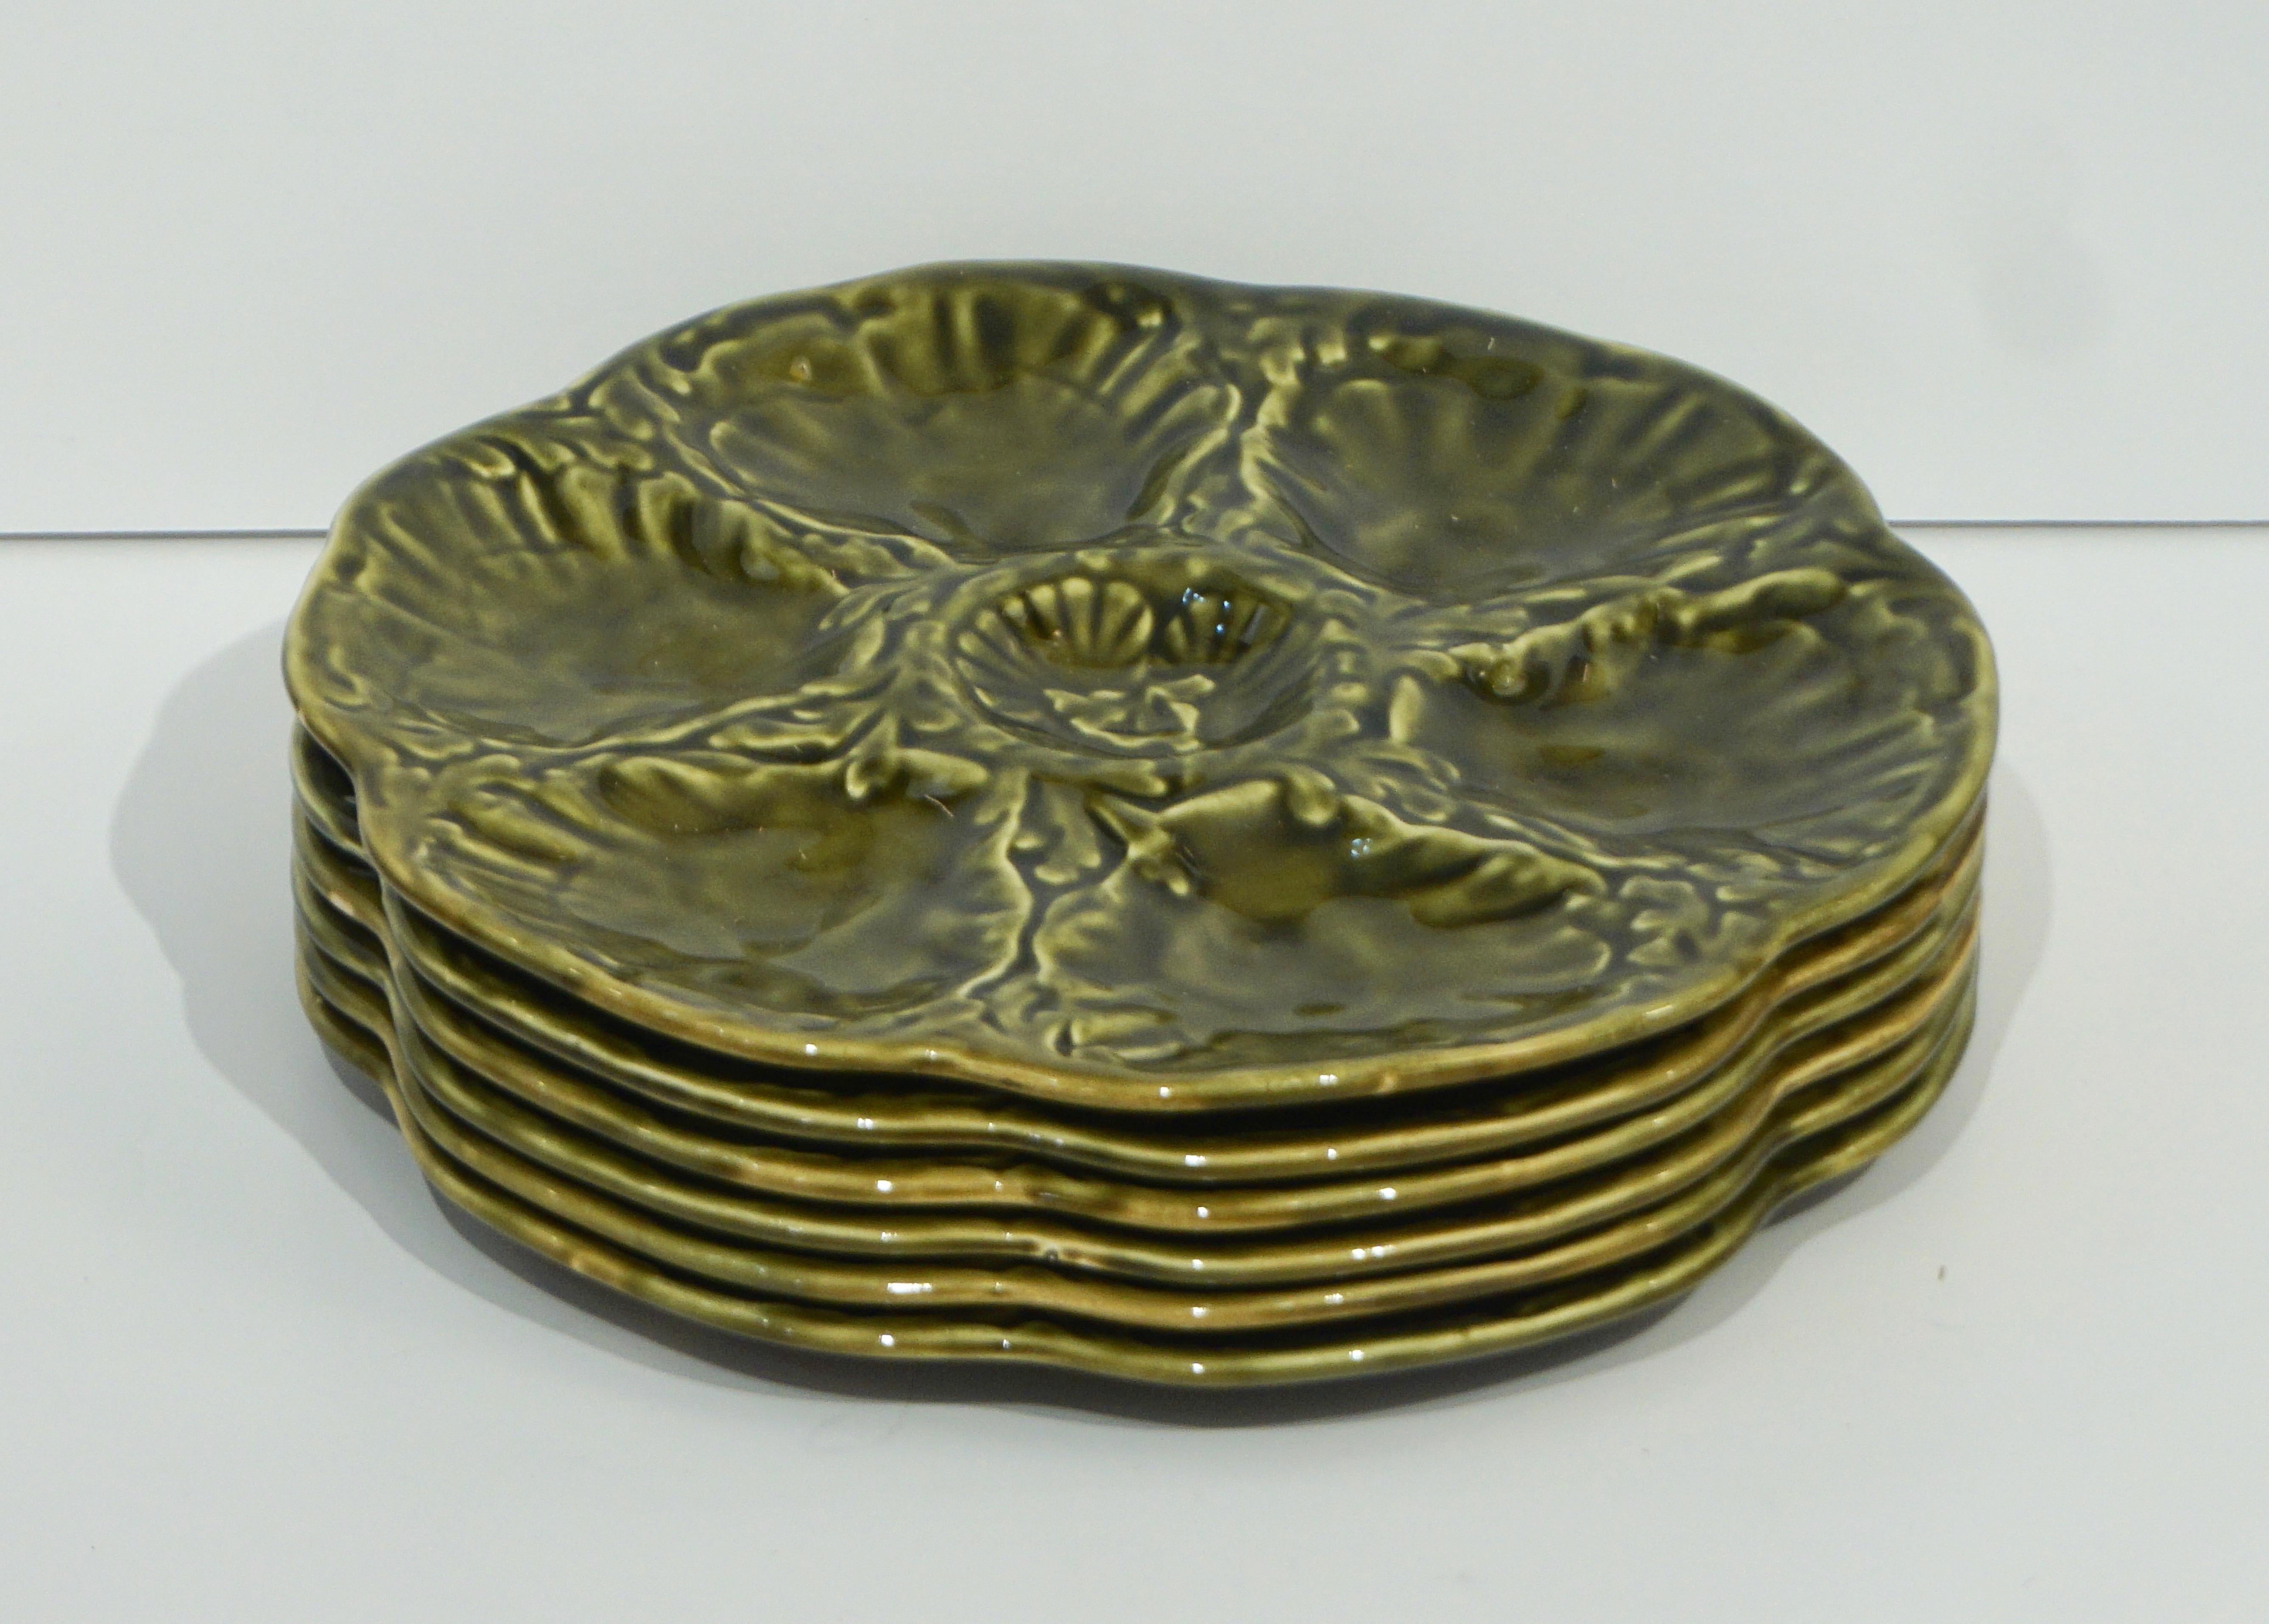 A Mid-Century Modern set of six French Faience oyster plates, circa 1950-1960, signed Gien in glazed barbotine ceramic with textured earth tones of moss green, this set is very special because still in its original organic modern wooden box,